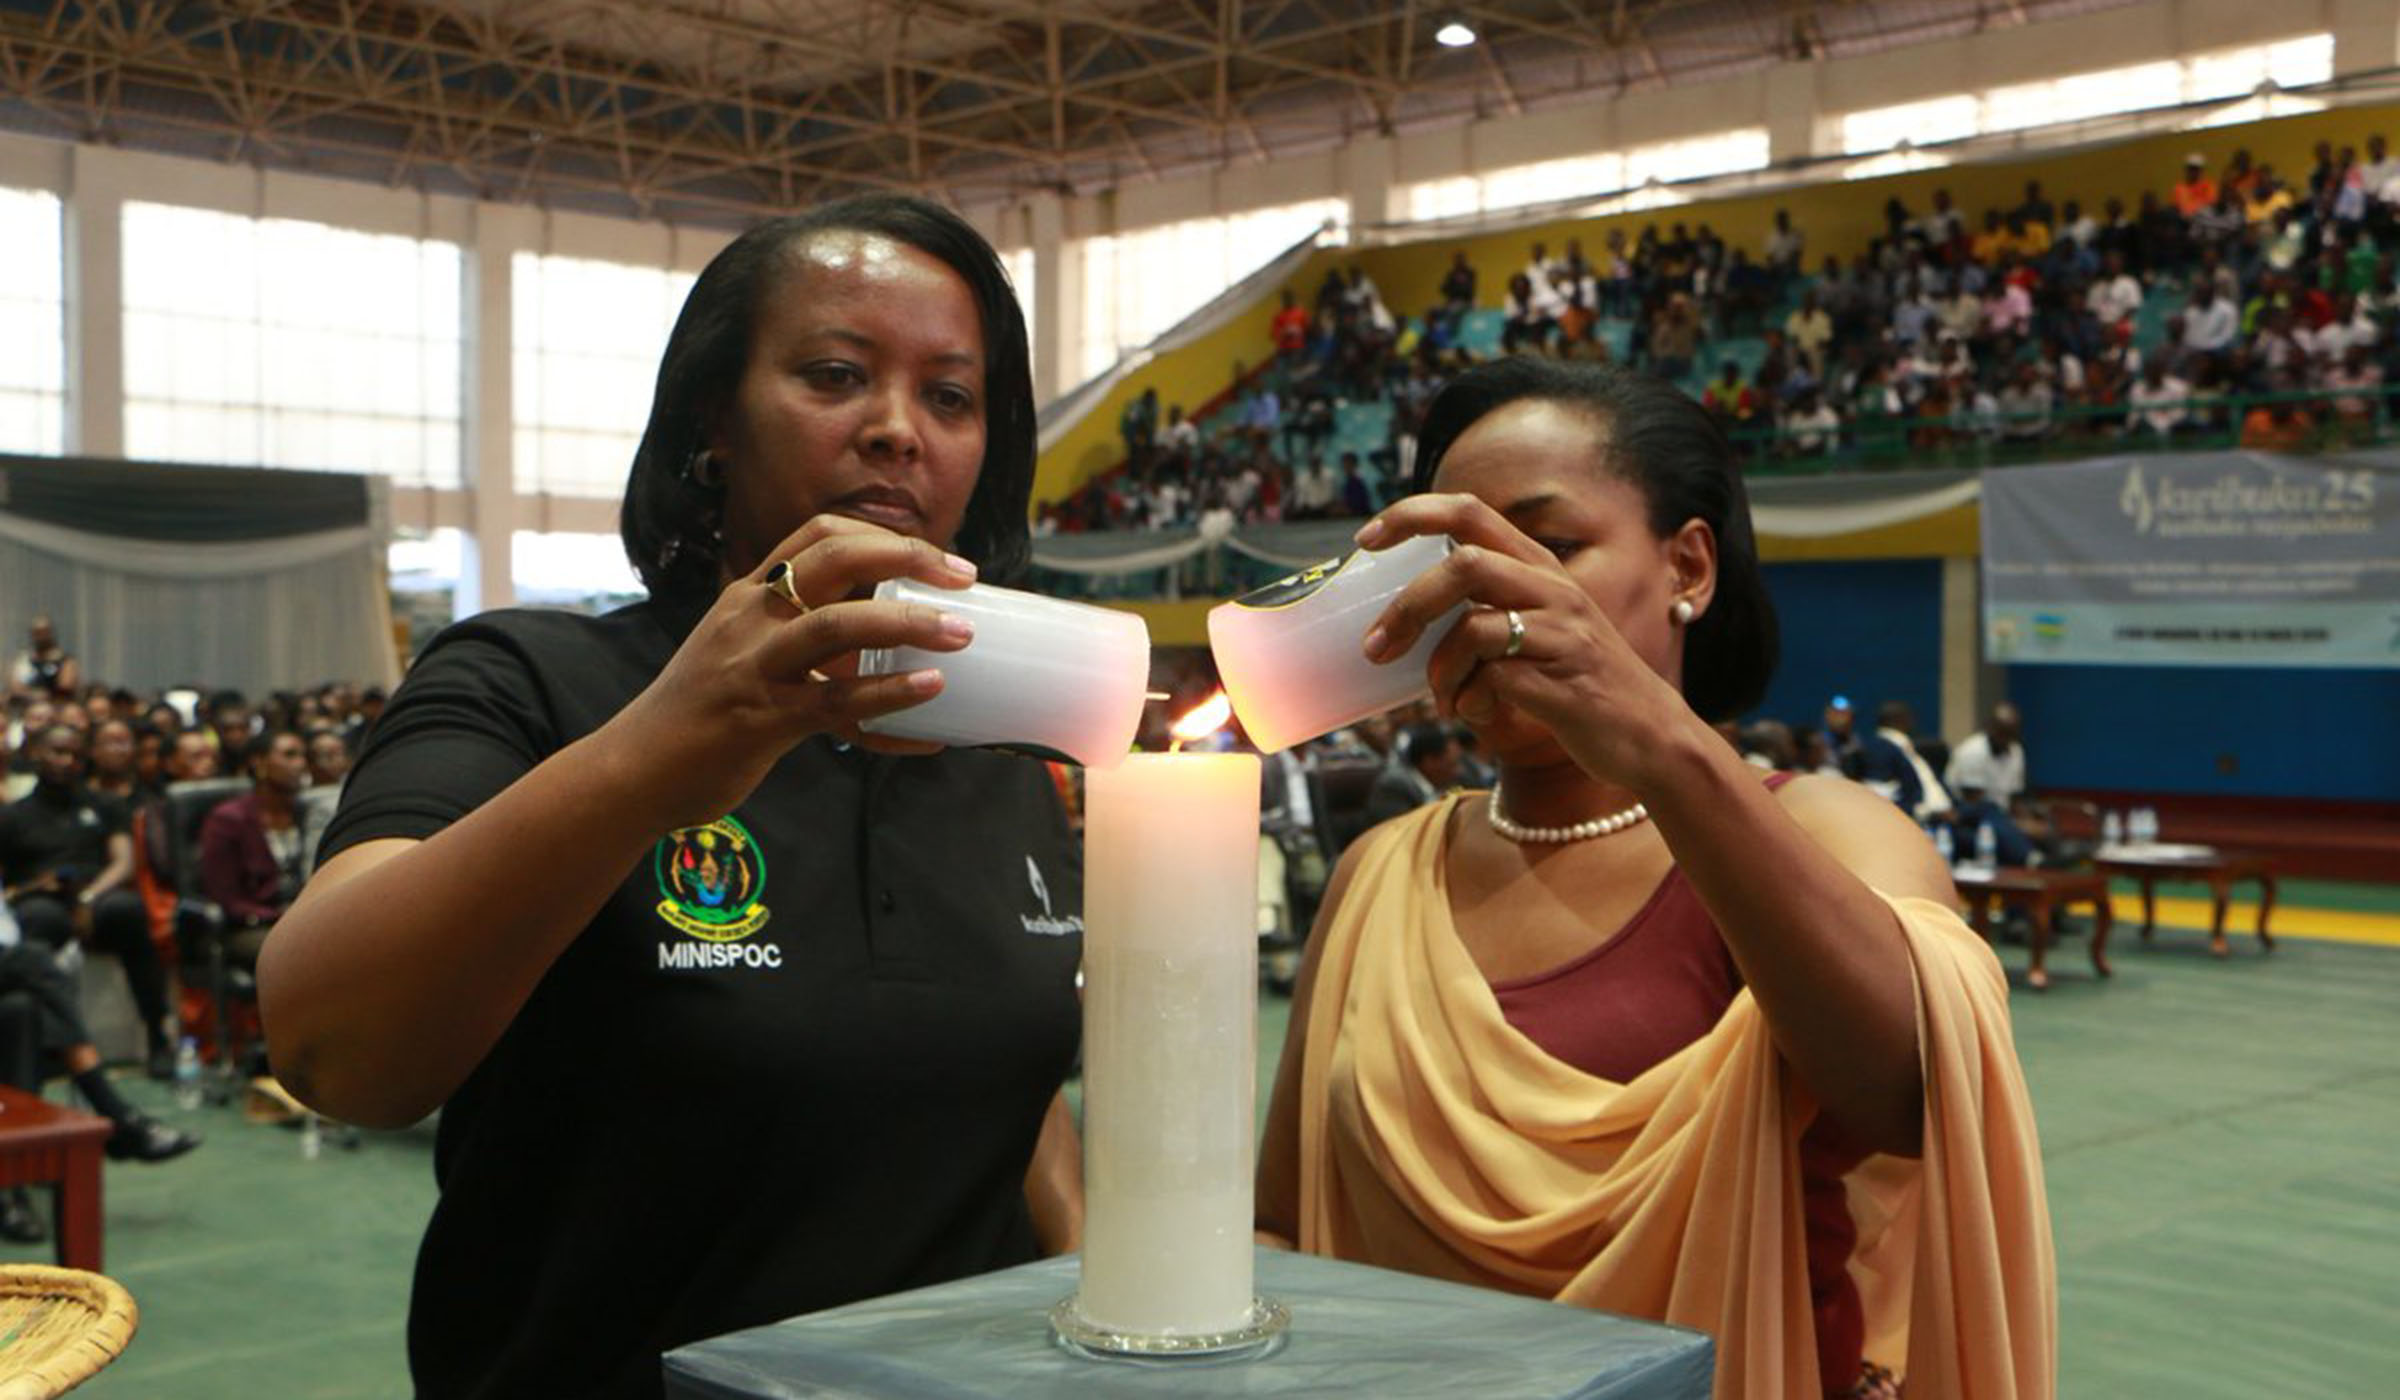 Sports minister Esperance Nyirasafari (L), and Youth minister Rosemary Mbabazi light the light of remembrance during the event at Petit Stadium on Wednesday. Courtesy.